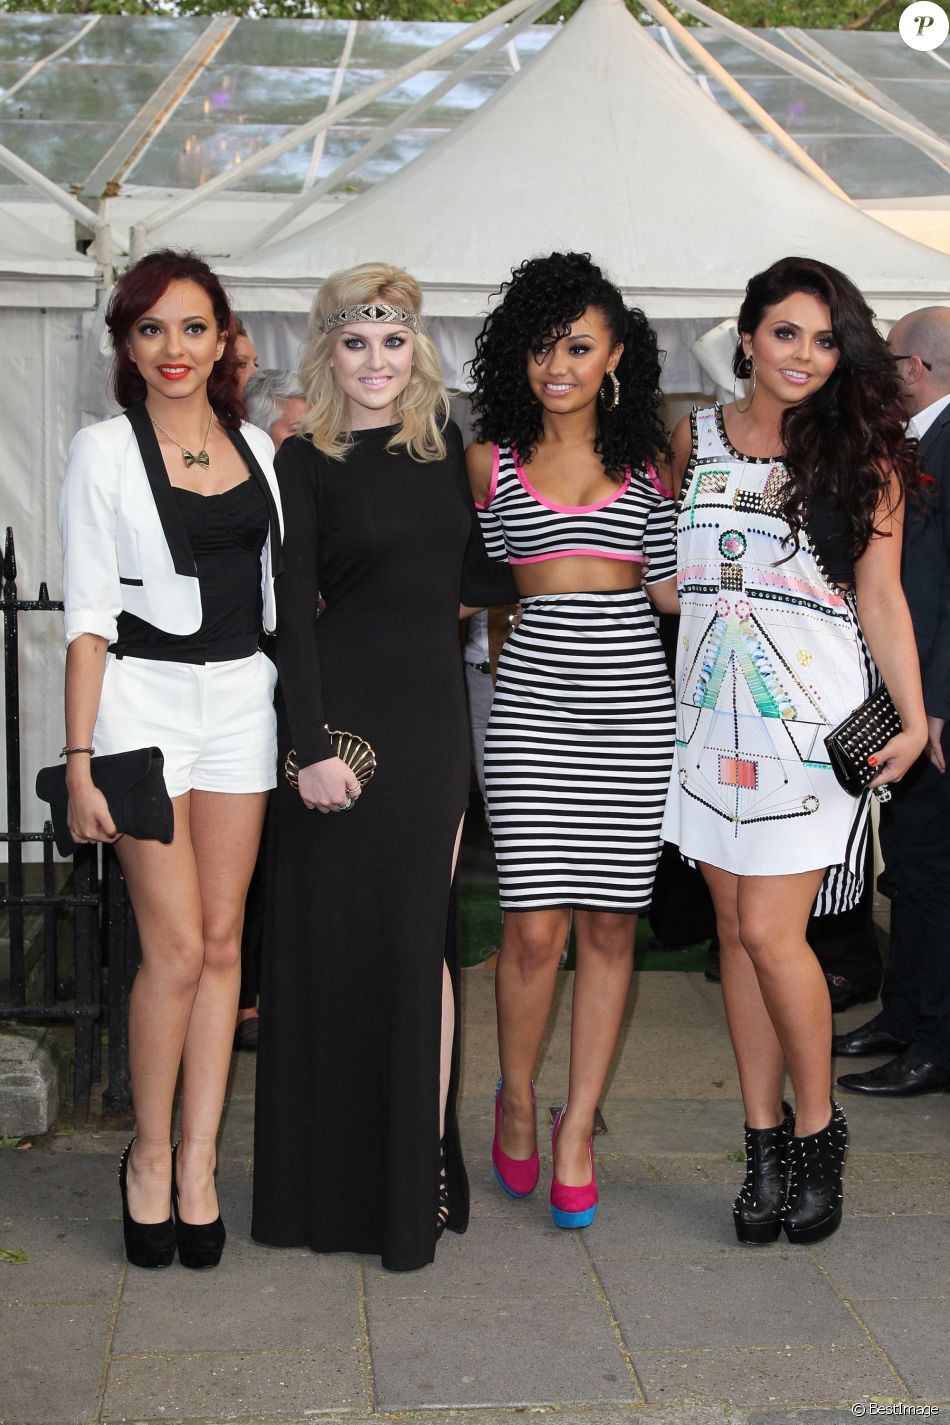 Jade Thirlwall, Perrie Edwards, Leigh-Anne Pinnock, Jesy Nelson - Soirée &quot;Glamour women of the year awards&quot; à Londres. Le 29 mai 2012.